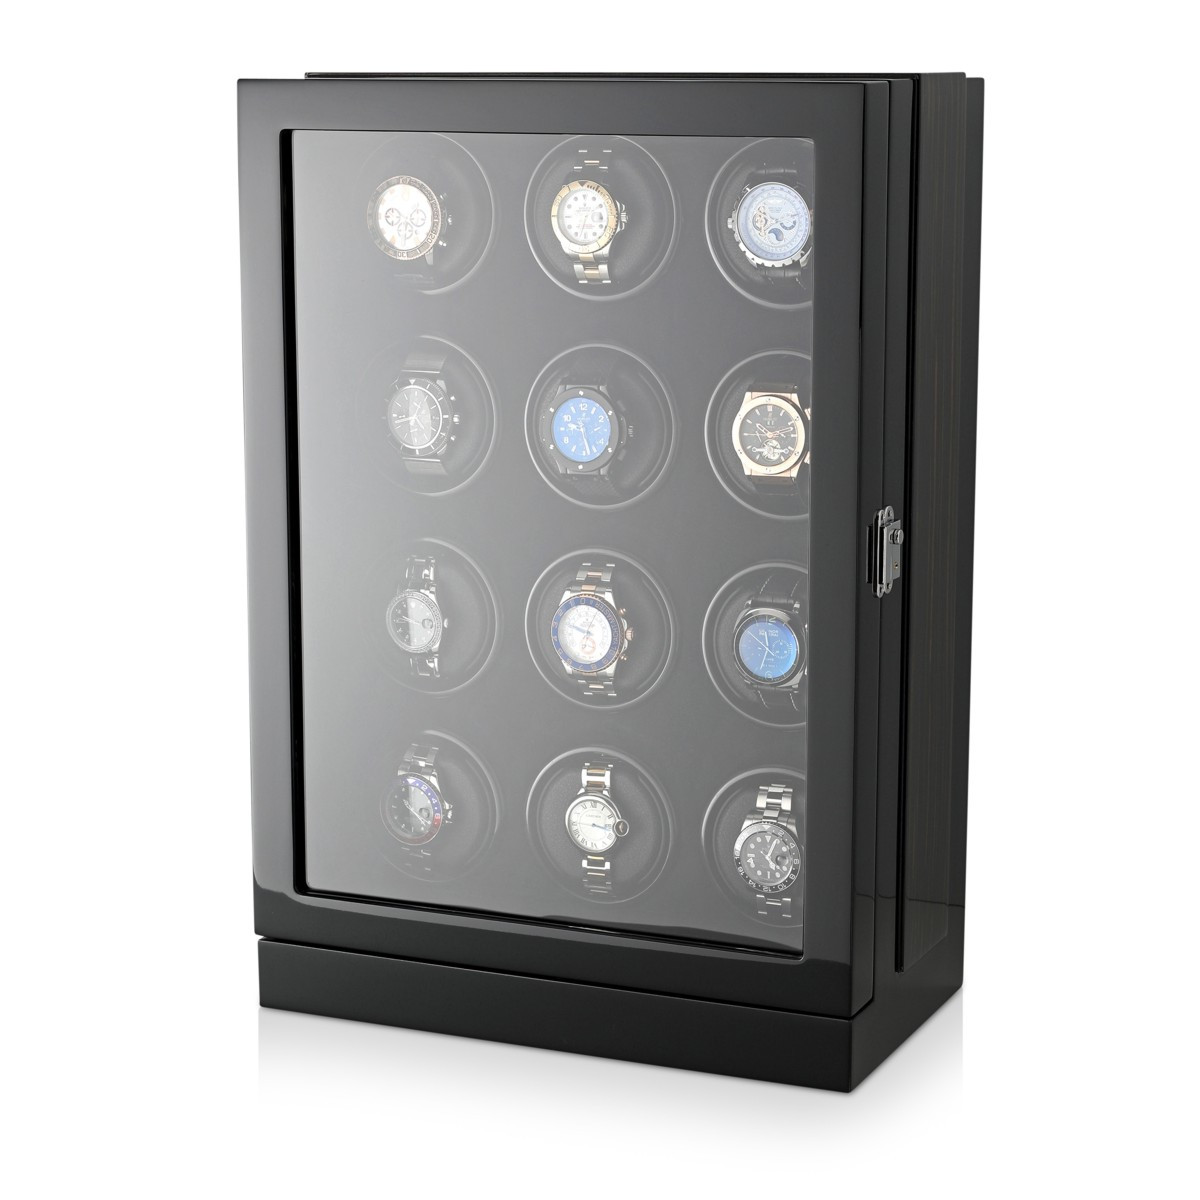 12 Watch Winder WW-8205-BMB for Automatic Watches